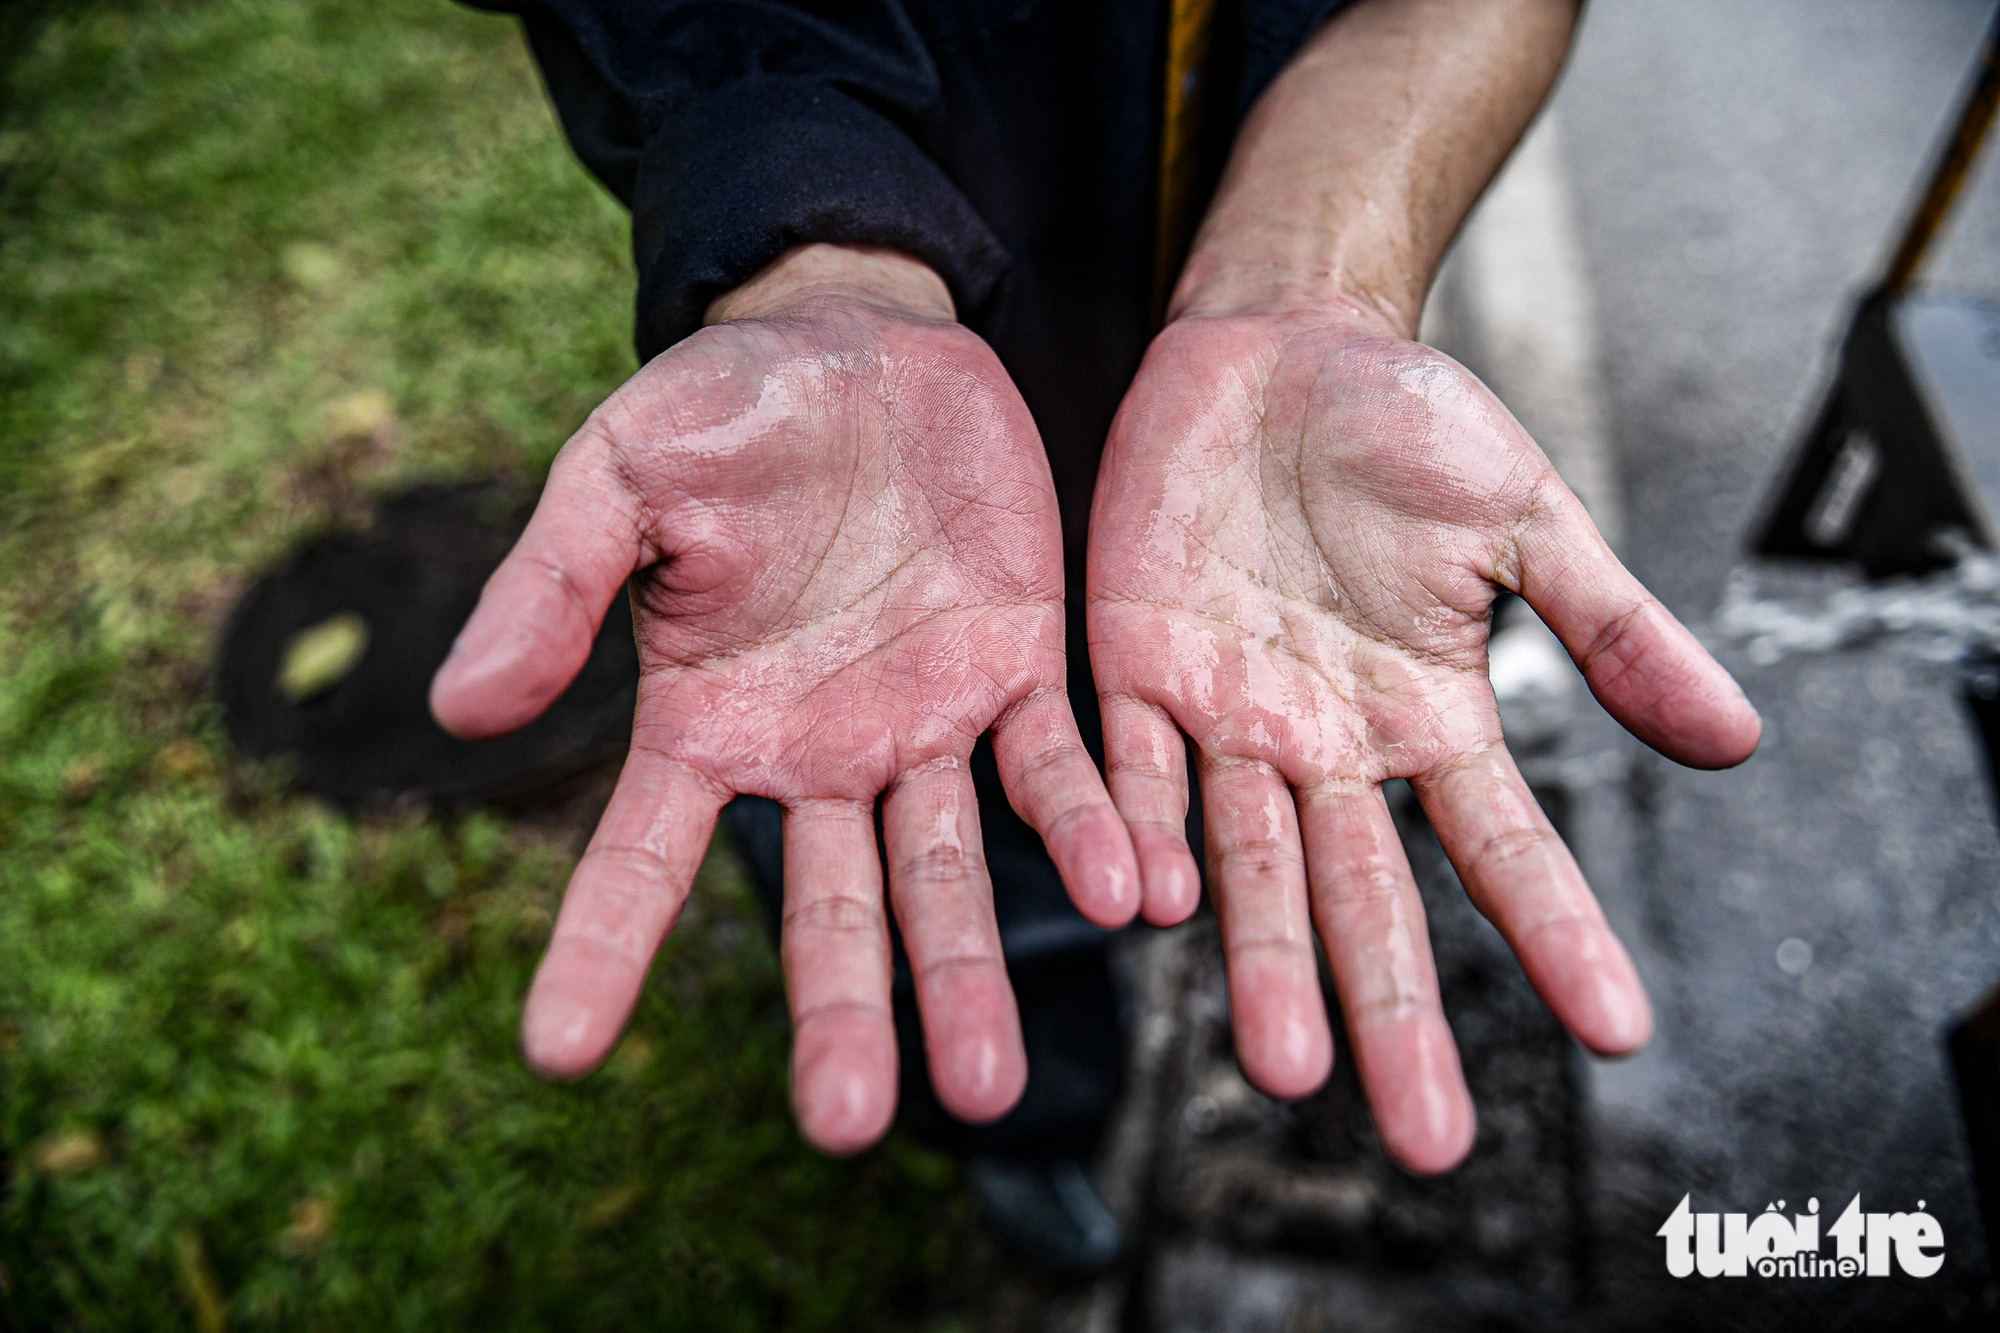 The skin turns reddened and the hands chill after hours of immersion in cold wastewater. Photo: Nam Tran / Tuoi Tre